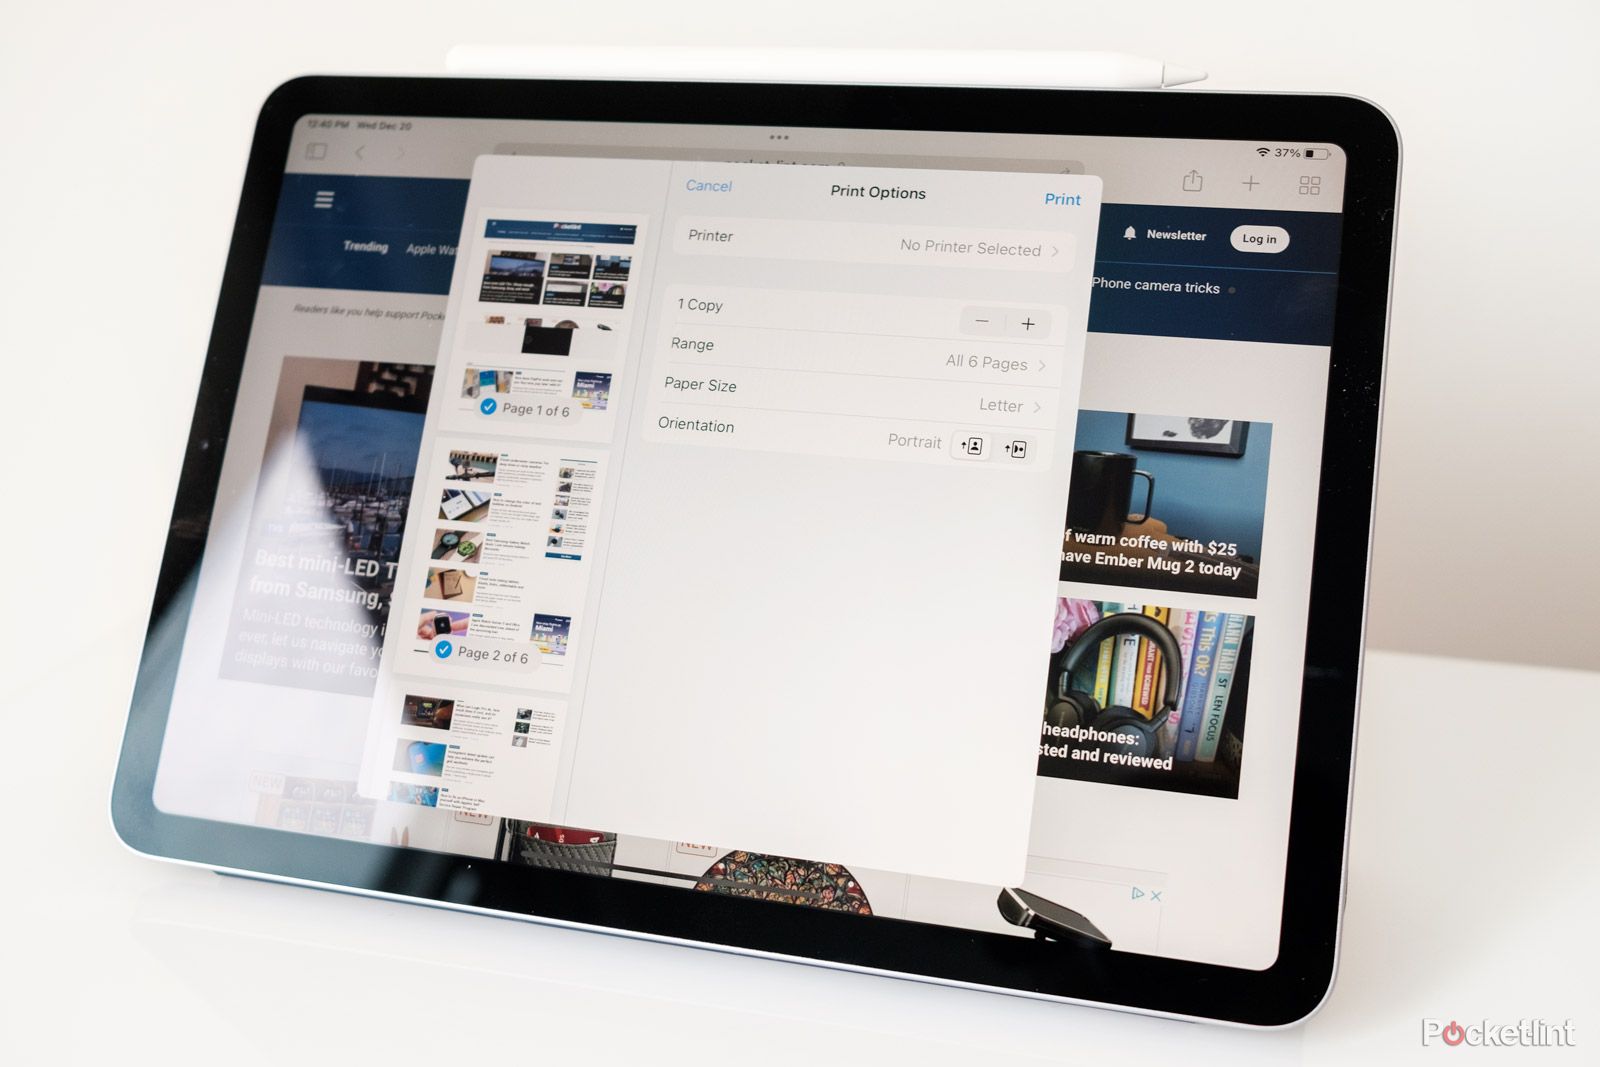 Apple's AirPrint technology allows iPad users to print documents directly from the Share Sheet.